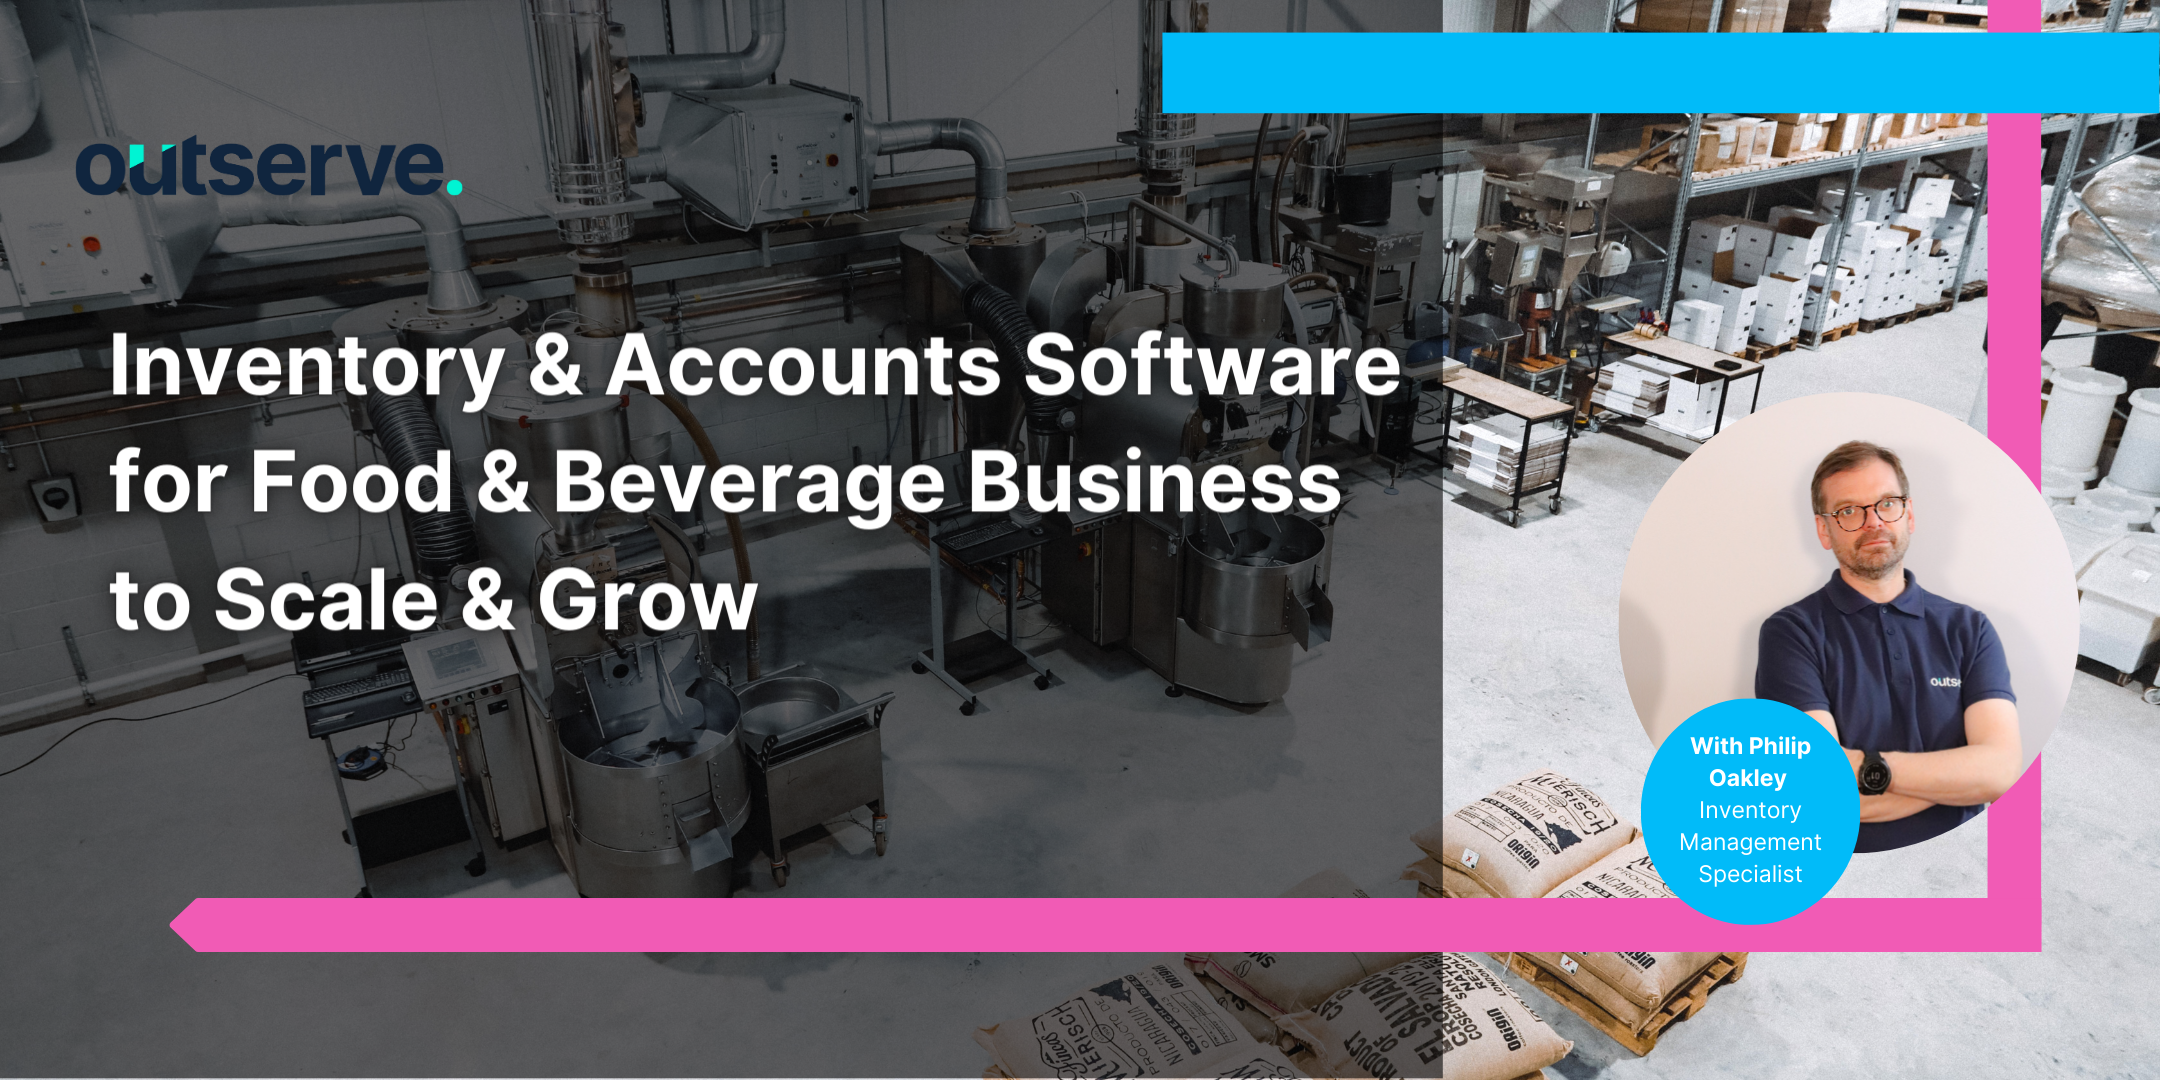 Webinar: Inventory & Accounts Software for Food & Beverage Business to Scale & Grow